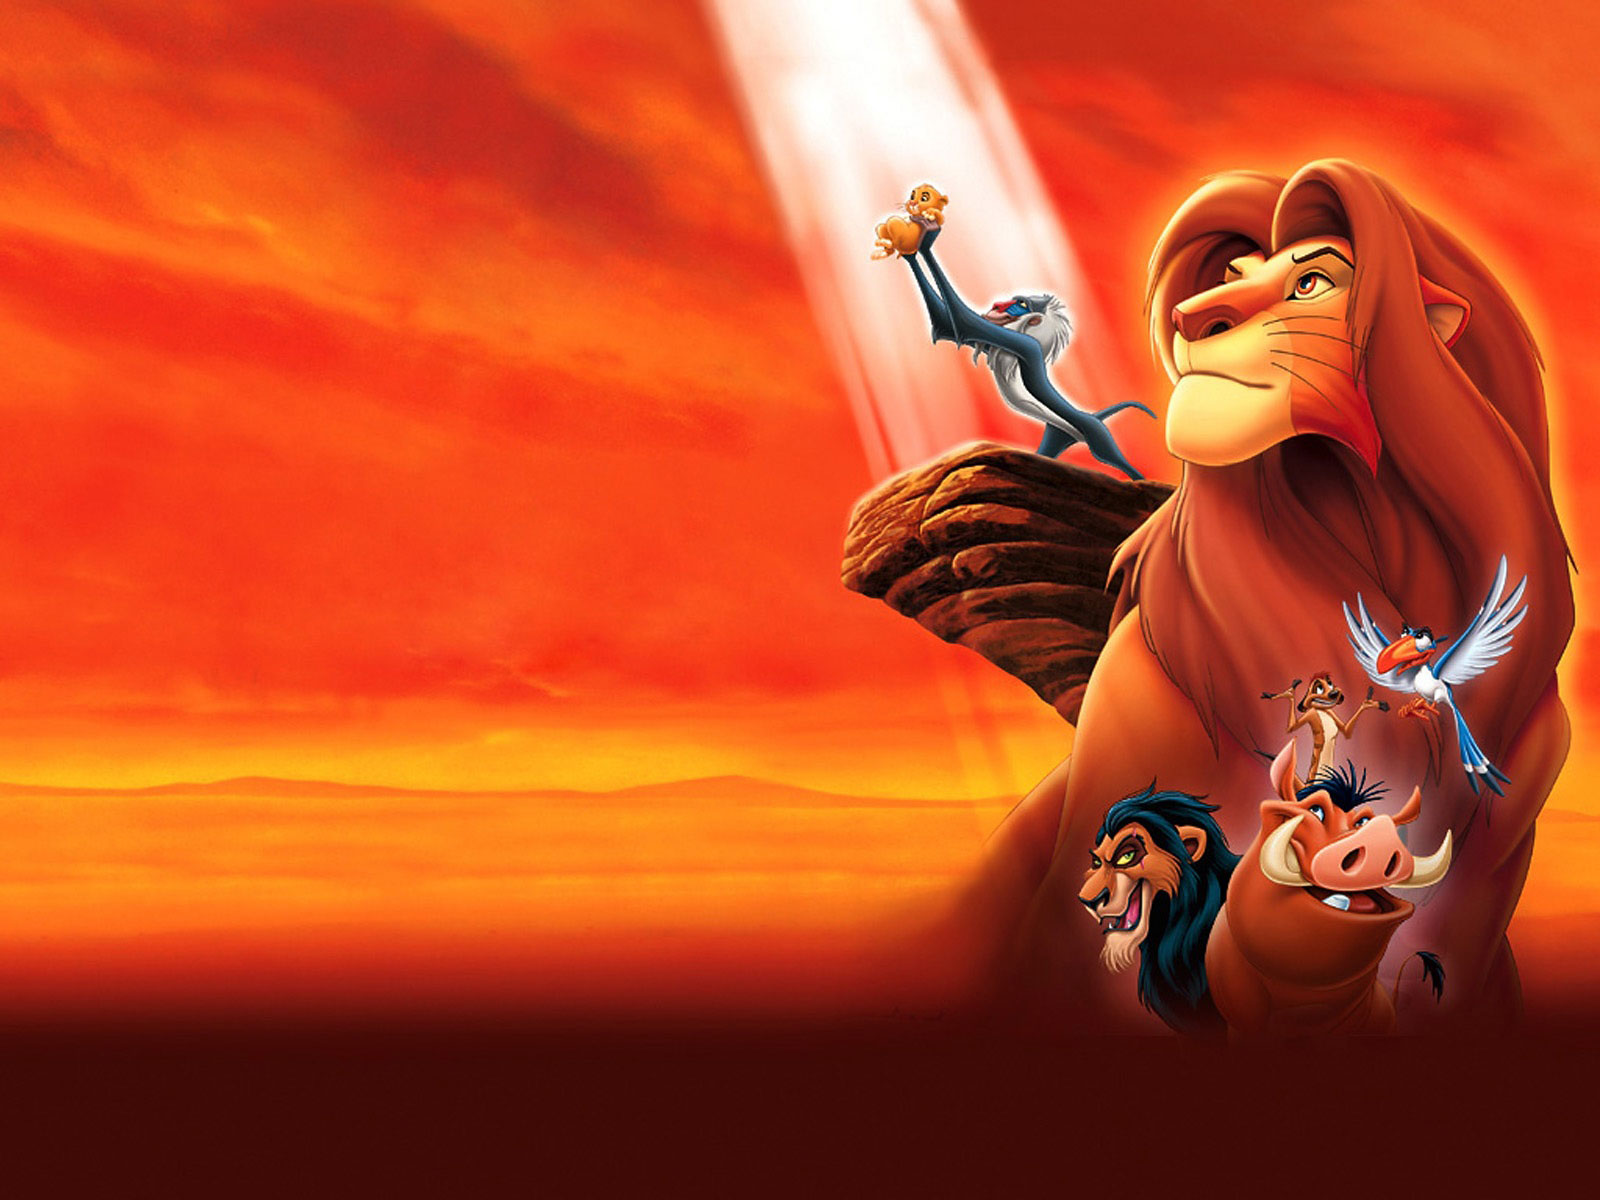 The Lion King - Lion King Poster Background - HD Wallpaper 